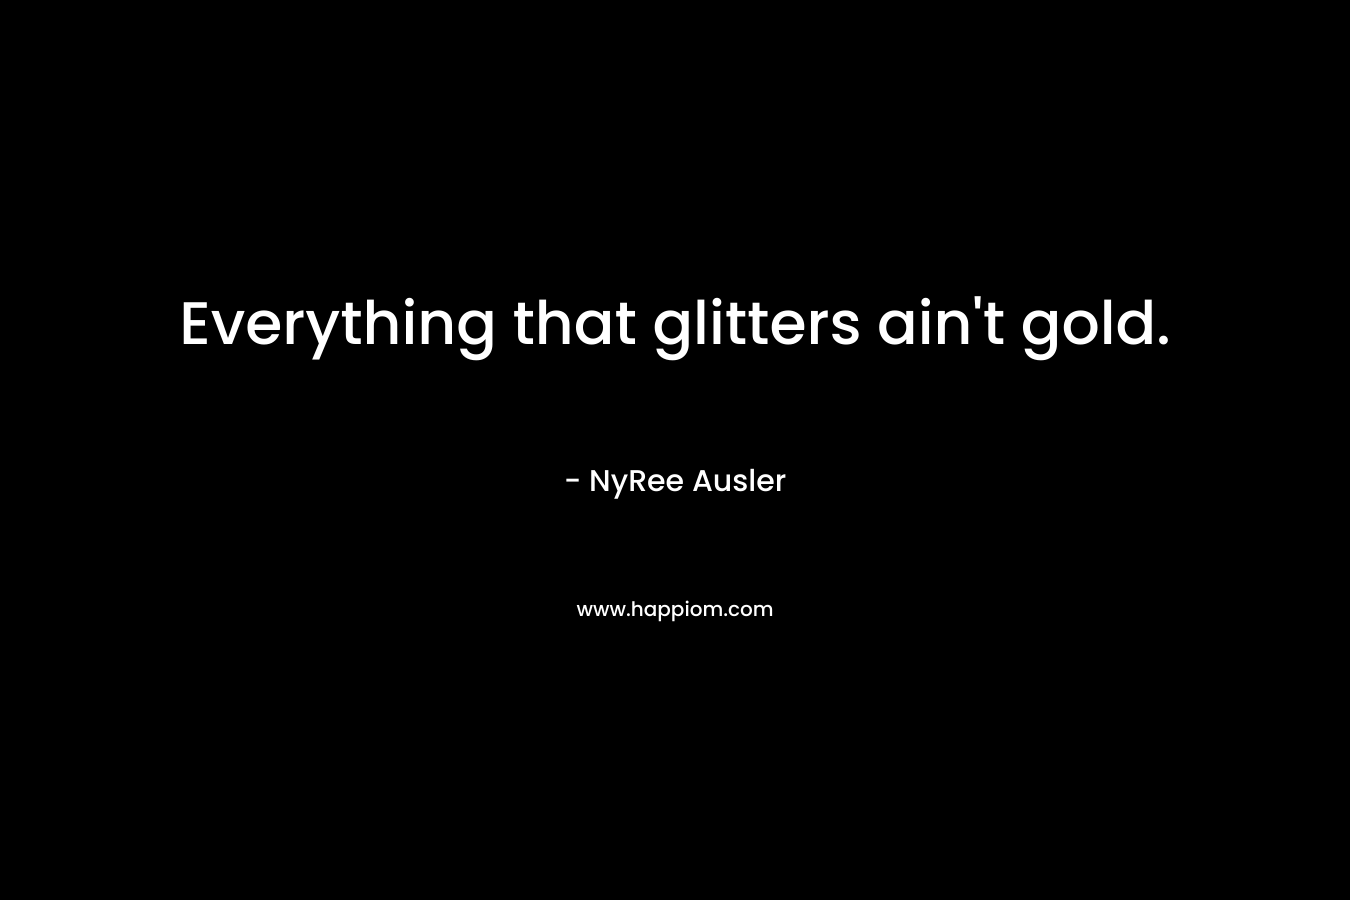 Everything that glitters ain’t gold. – NyRee Ausler